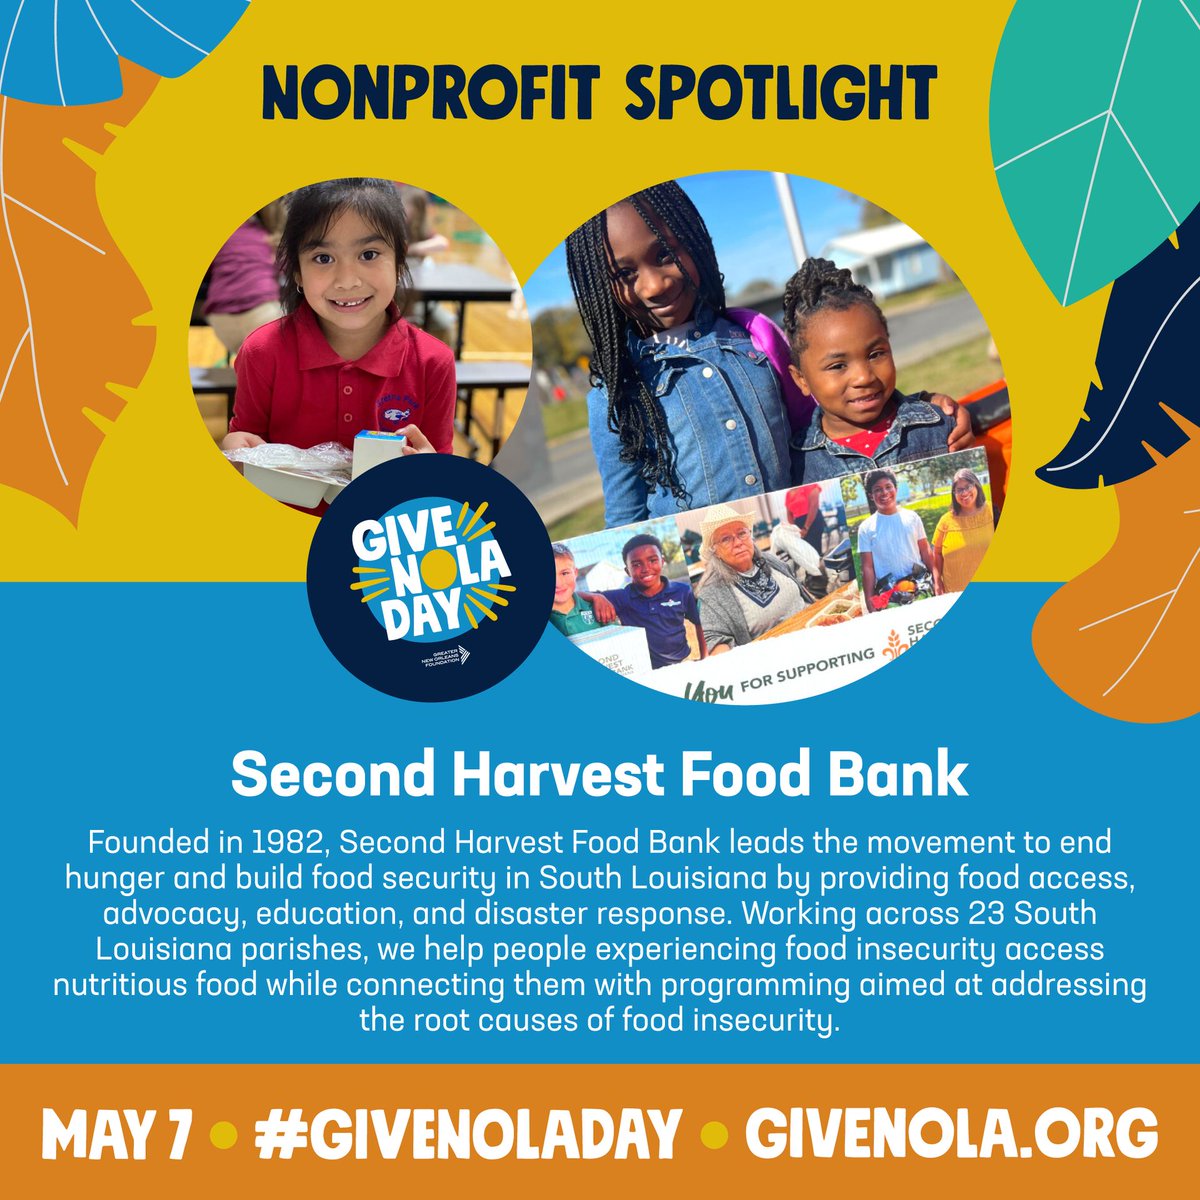 Second Harvest Food Bank was featured by the Greater New Orleans Foundation for #GiveNOLADay. They're committed to their mission to end hunger and build food security across 23 South Louisiana parishes.

#GivingTuesday #betsybirdsong #TheBirdsongGroup #worthycause #charity